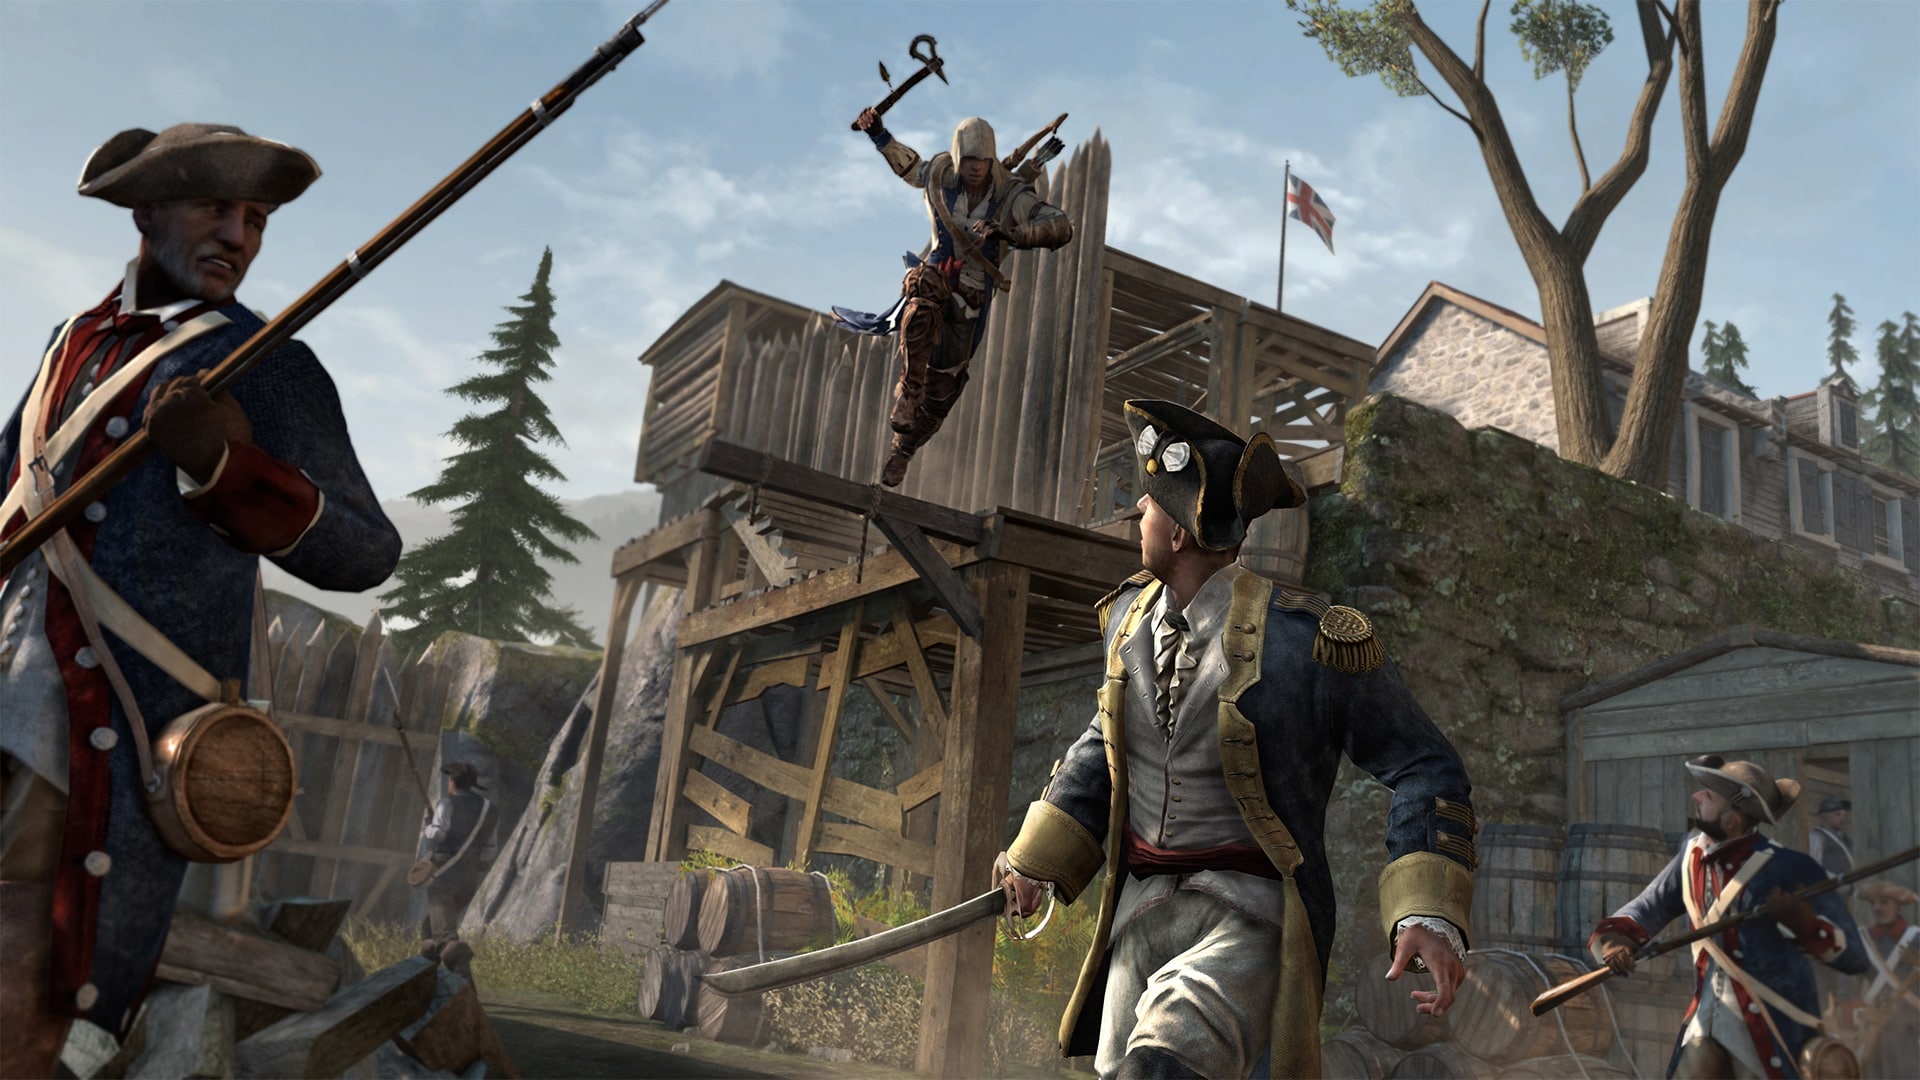 assassin creed 3 game setup for pc